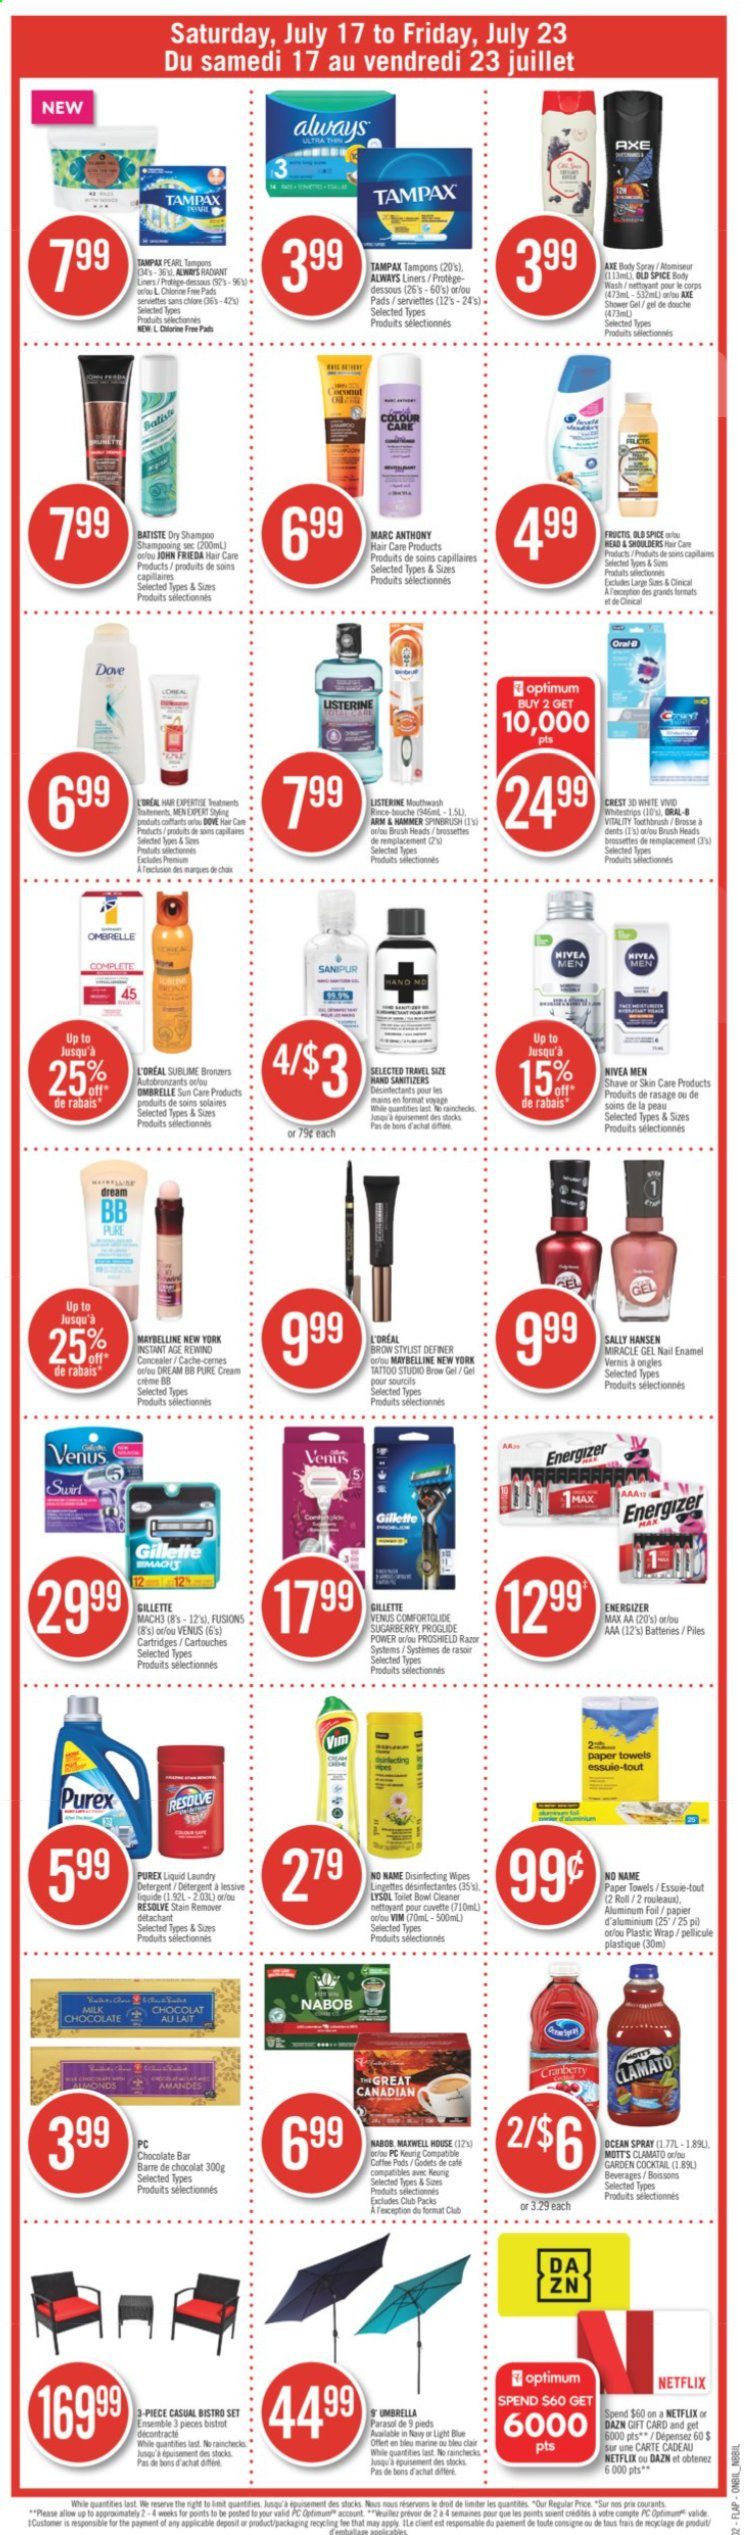 thumbnail - Shoppers Drug Mart Flyer - July 17, 2021 - July 23, 2021 - Sales products - milk chocolate, Mott's, chocolate bar, spice, Clamato, Maxwell House, Keurig, wipes, Always liners, kitchen towels, paper towels, cleaner, stain remover, Lysol, laundry detergent, Purex, body wash, shower gel, toothbrush, mouthwash, Crest, tampons, L’Oréal, John Frieda, Fructis, body spray, razor, Venus, nail enamel, corrector, umbrella, Gillette, Listerine, Maybelline, Sally Hansen, shampoo, Tampax, Head & Shoulders, Nivea, Old Spice. Page 20.